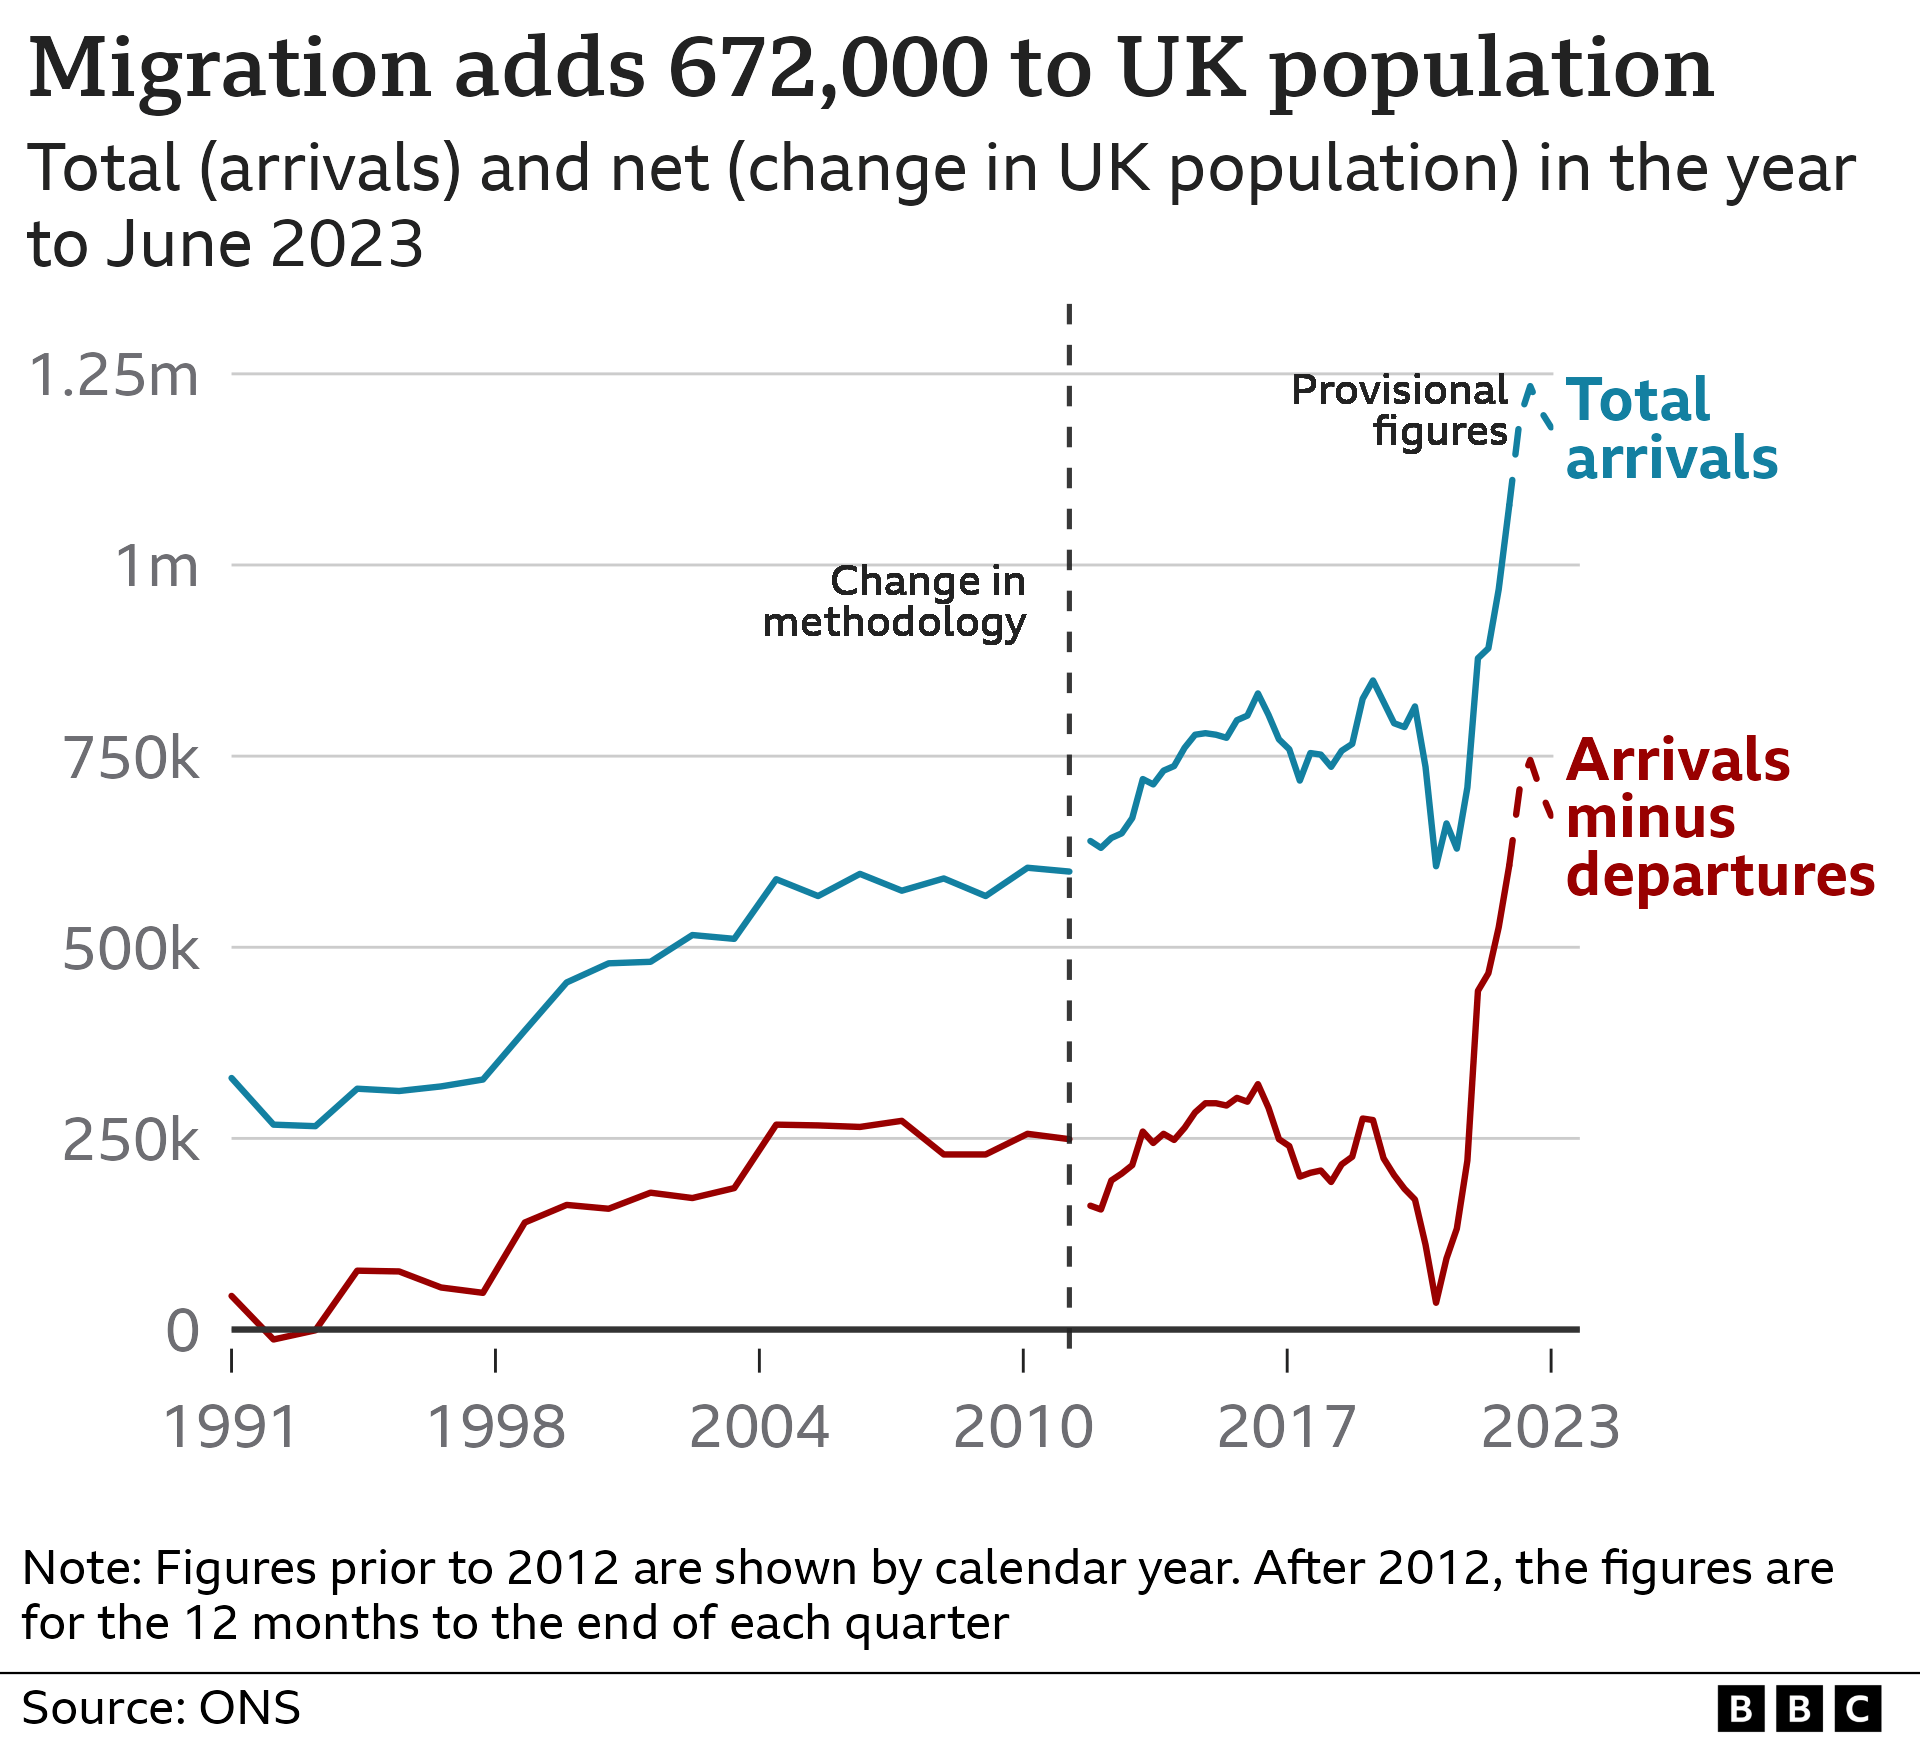 Graphic wey show "total migrant arrivals" and "arrivals minus departures" from 1991 to 2023